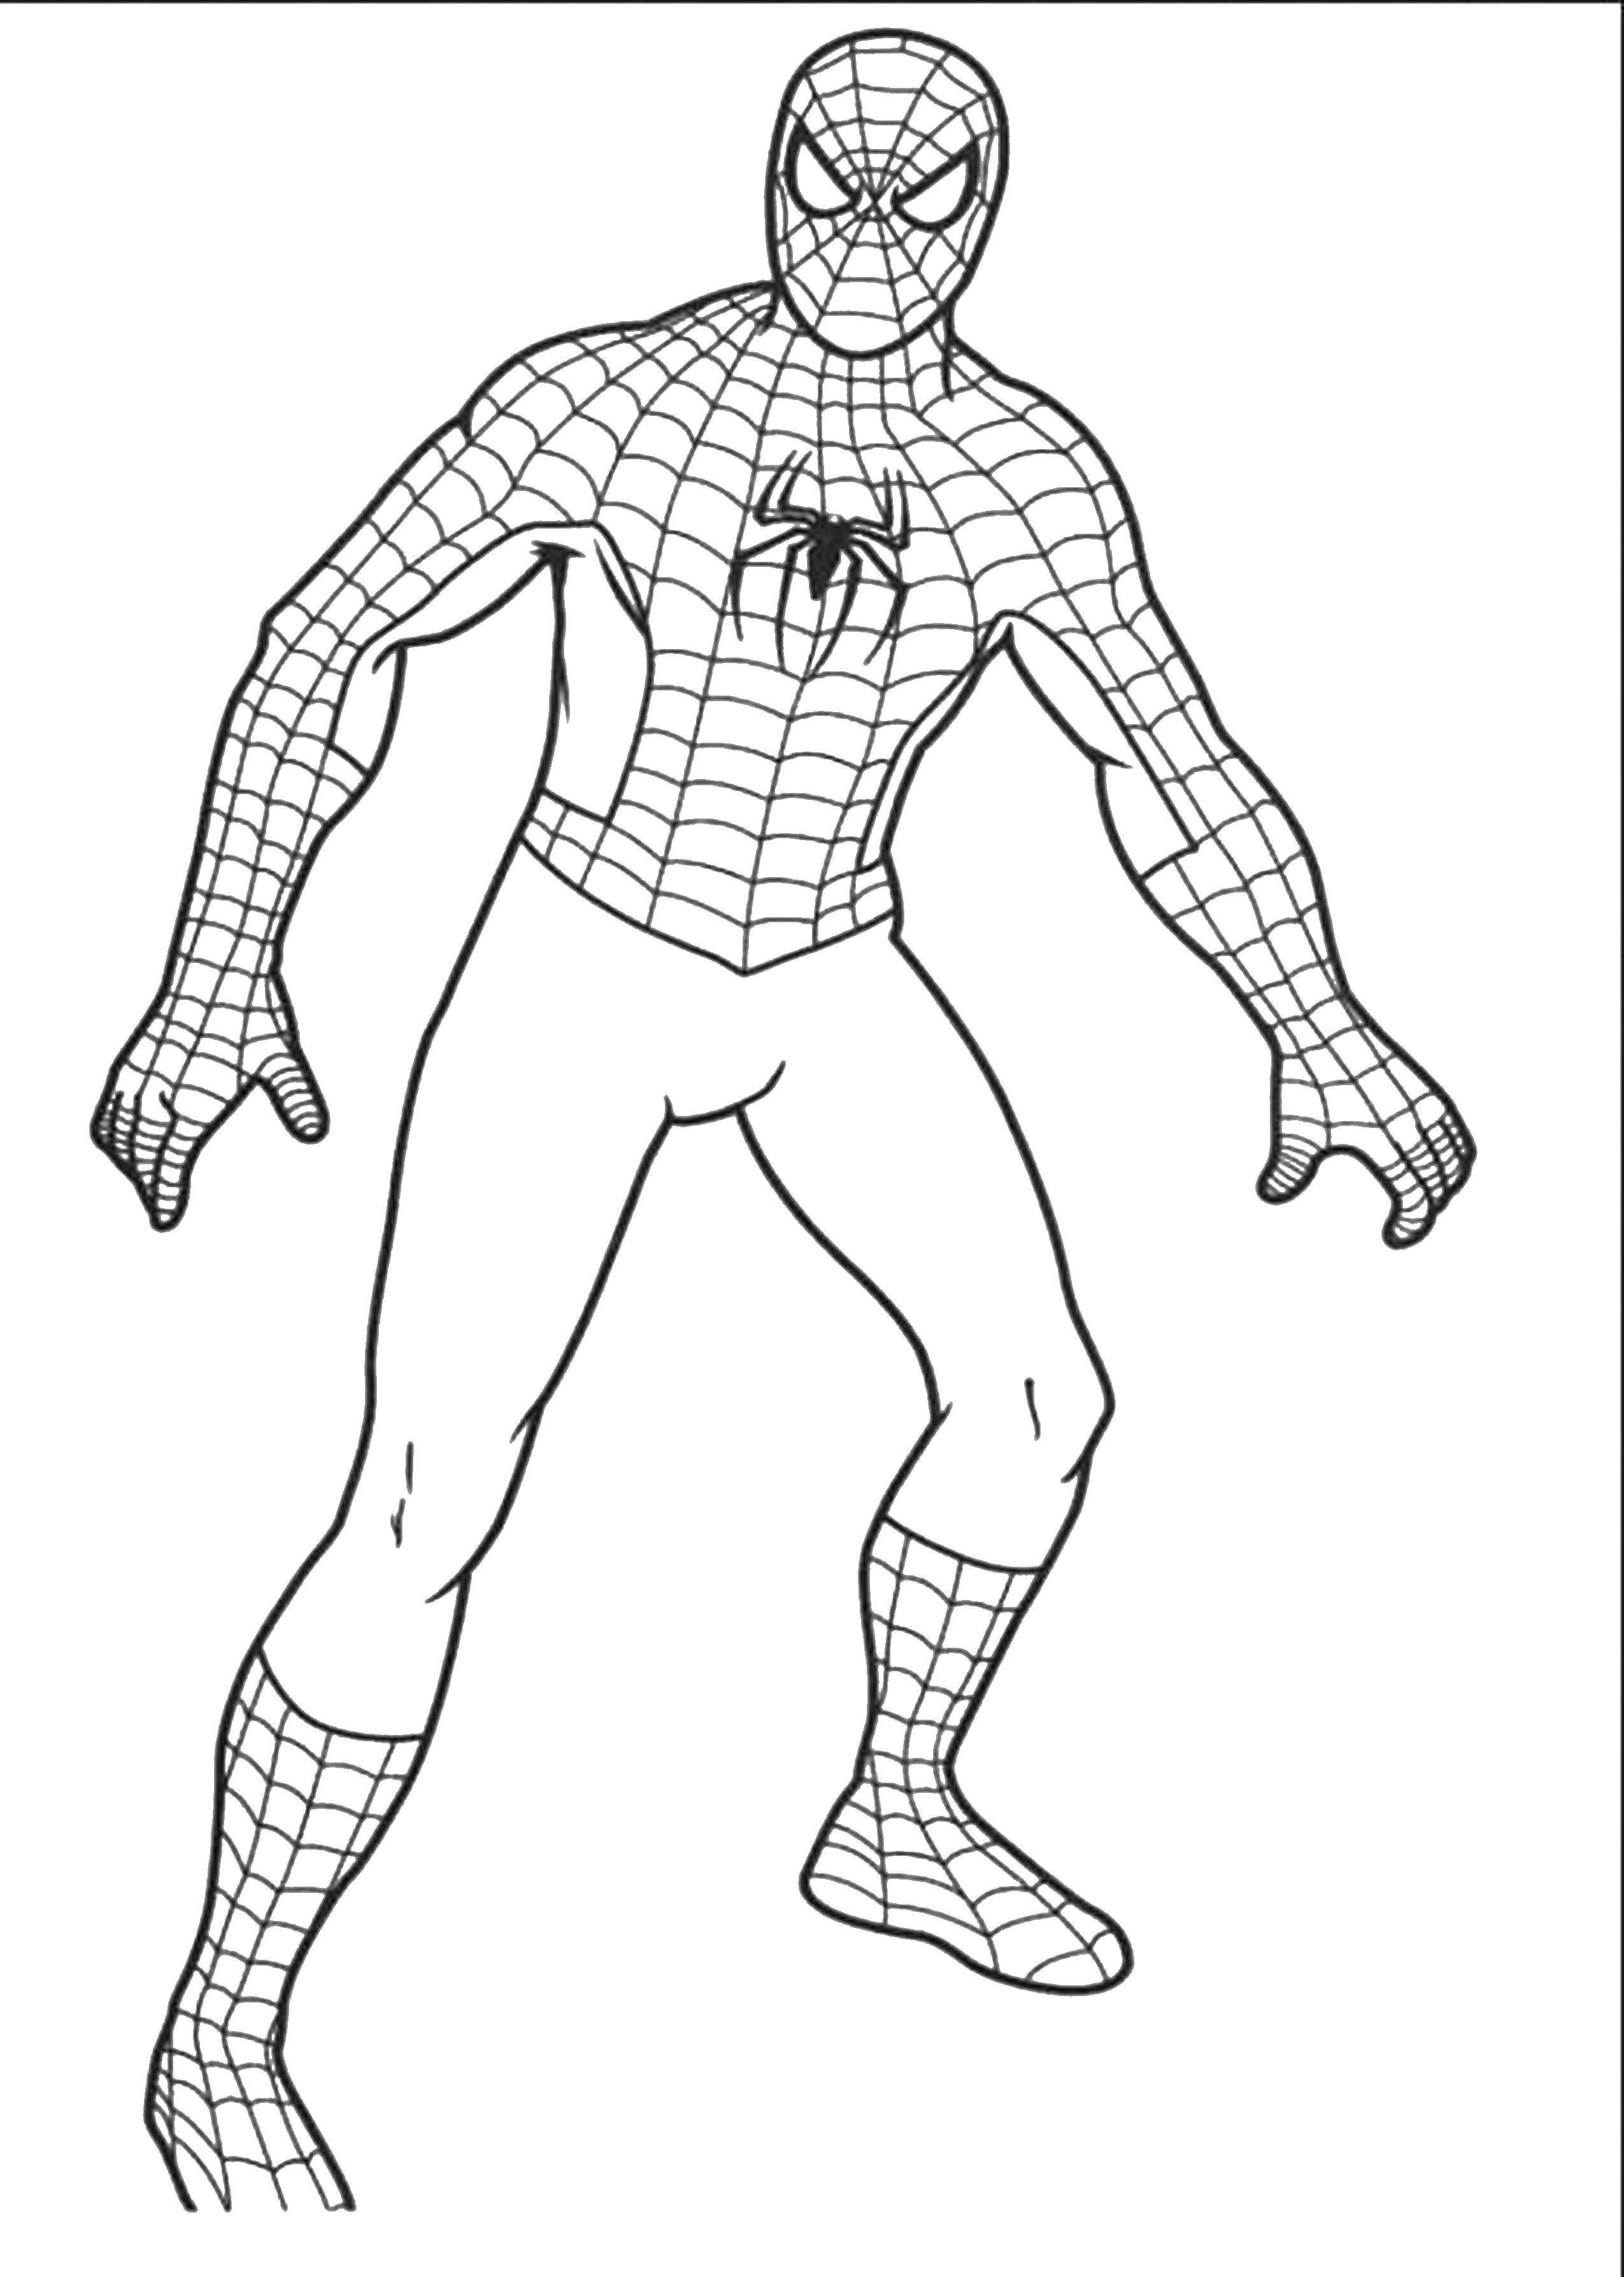 Coloring Spider-man. Category spider man. Tags:  spider man, Spiderman, movie, cartoon.